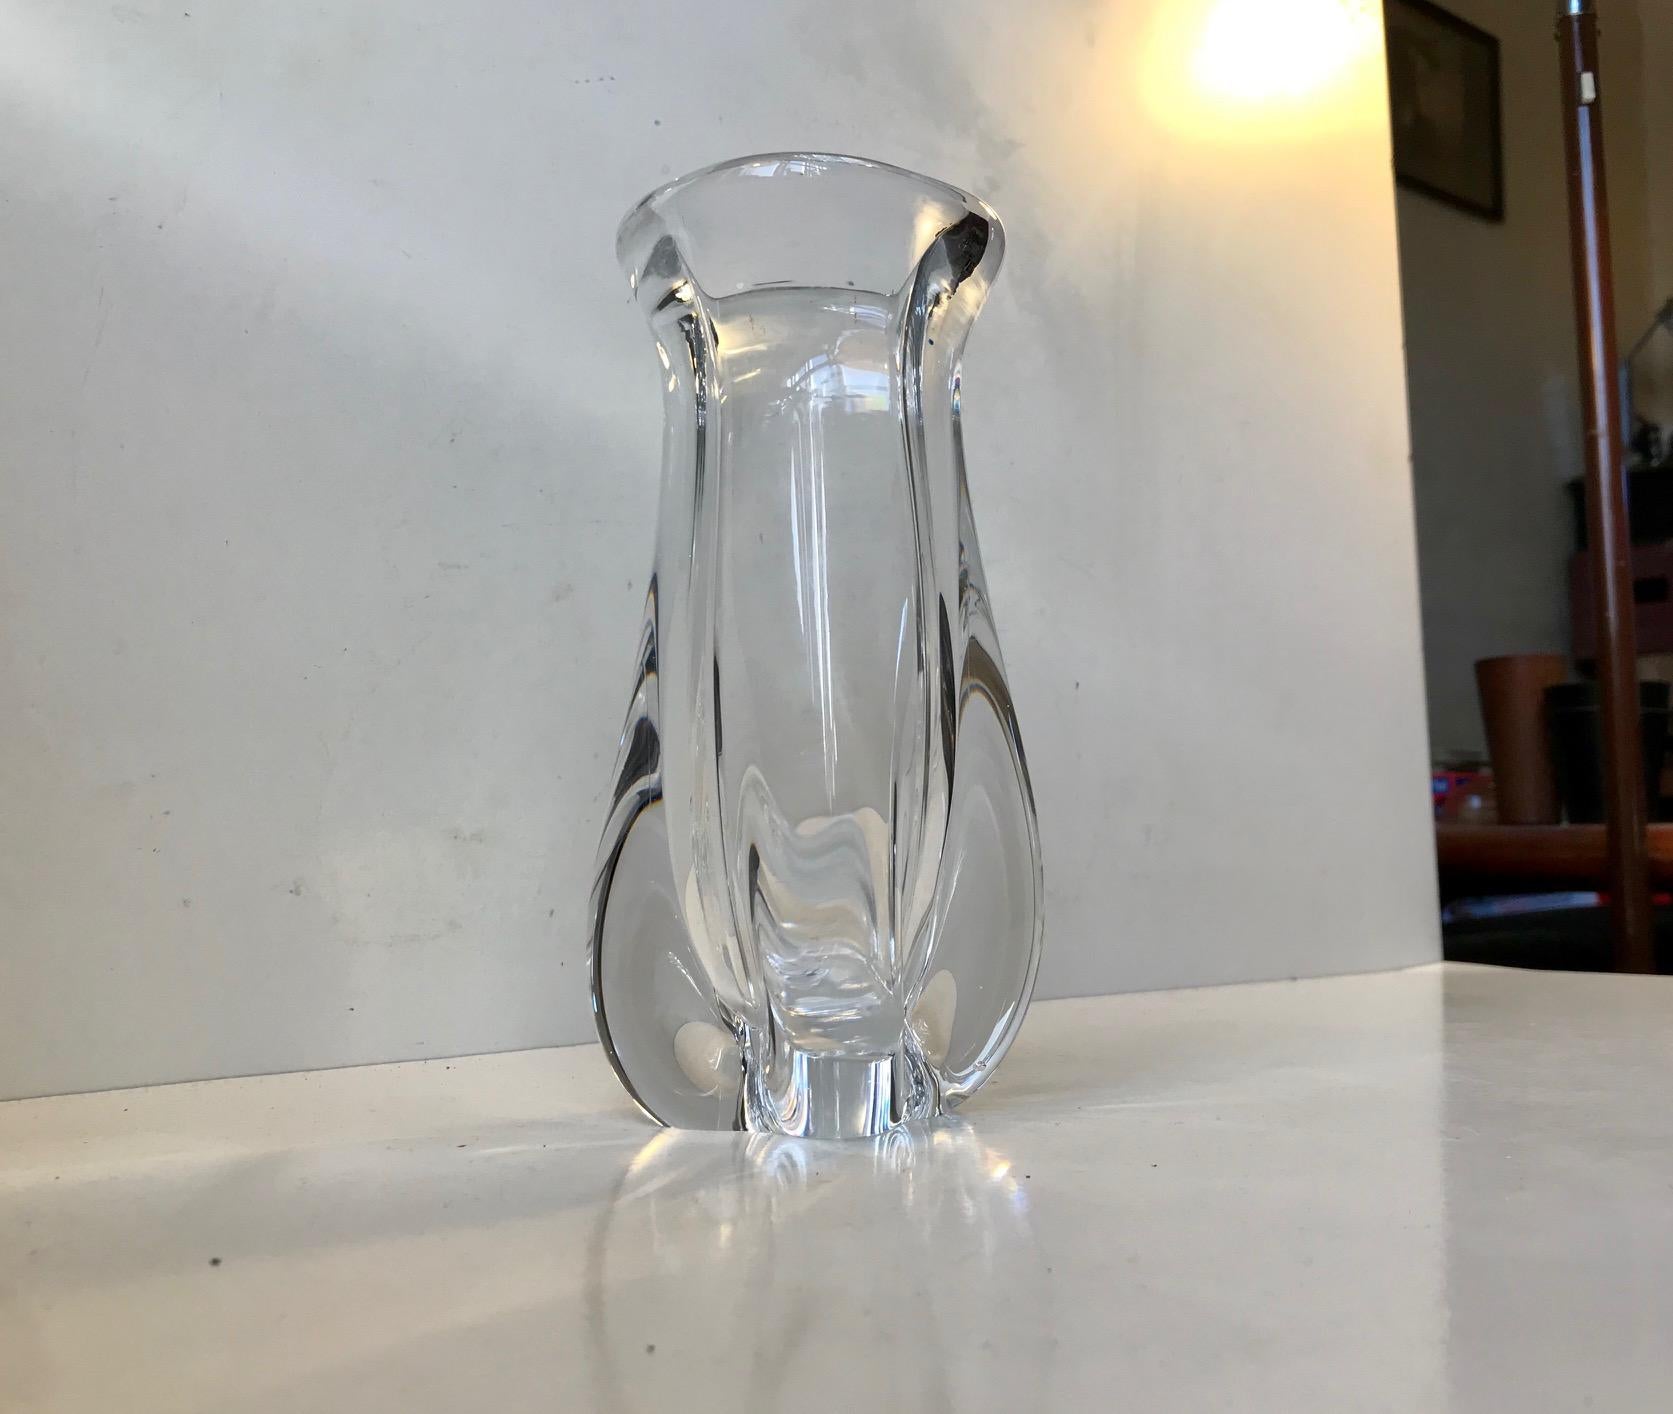 Thick organically shaped crystal vase. Designed by Niels Landberg and manufactured at Orrefors in Sweden during the 1950s. Fine, intact and clean vintage order.